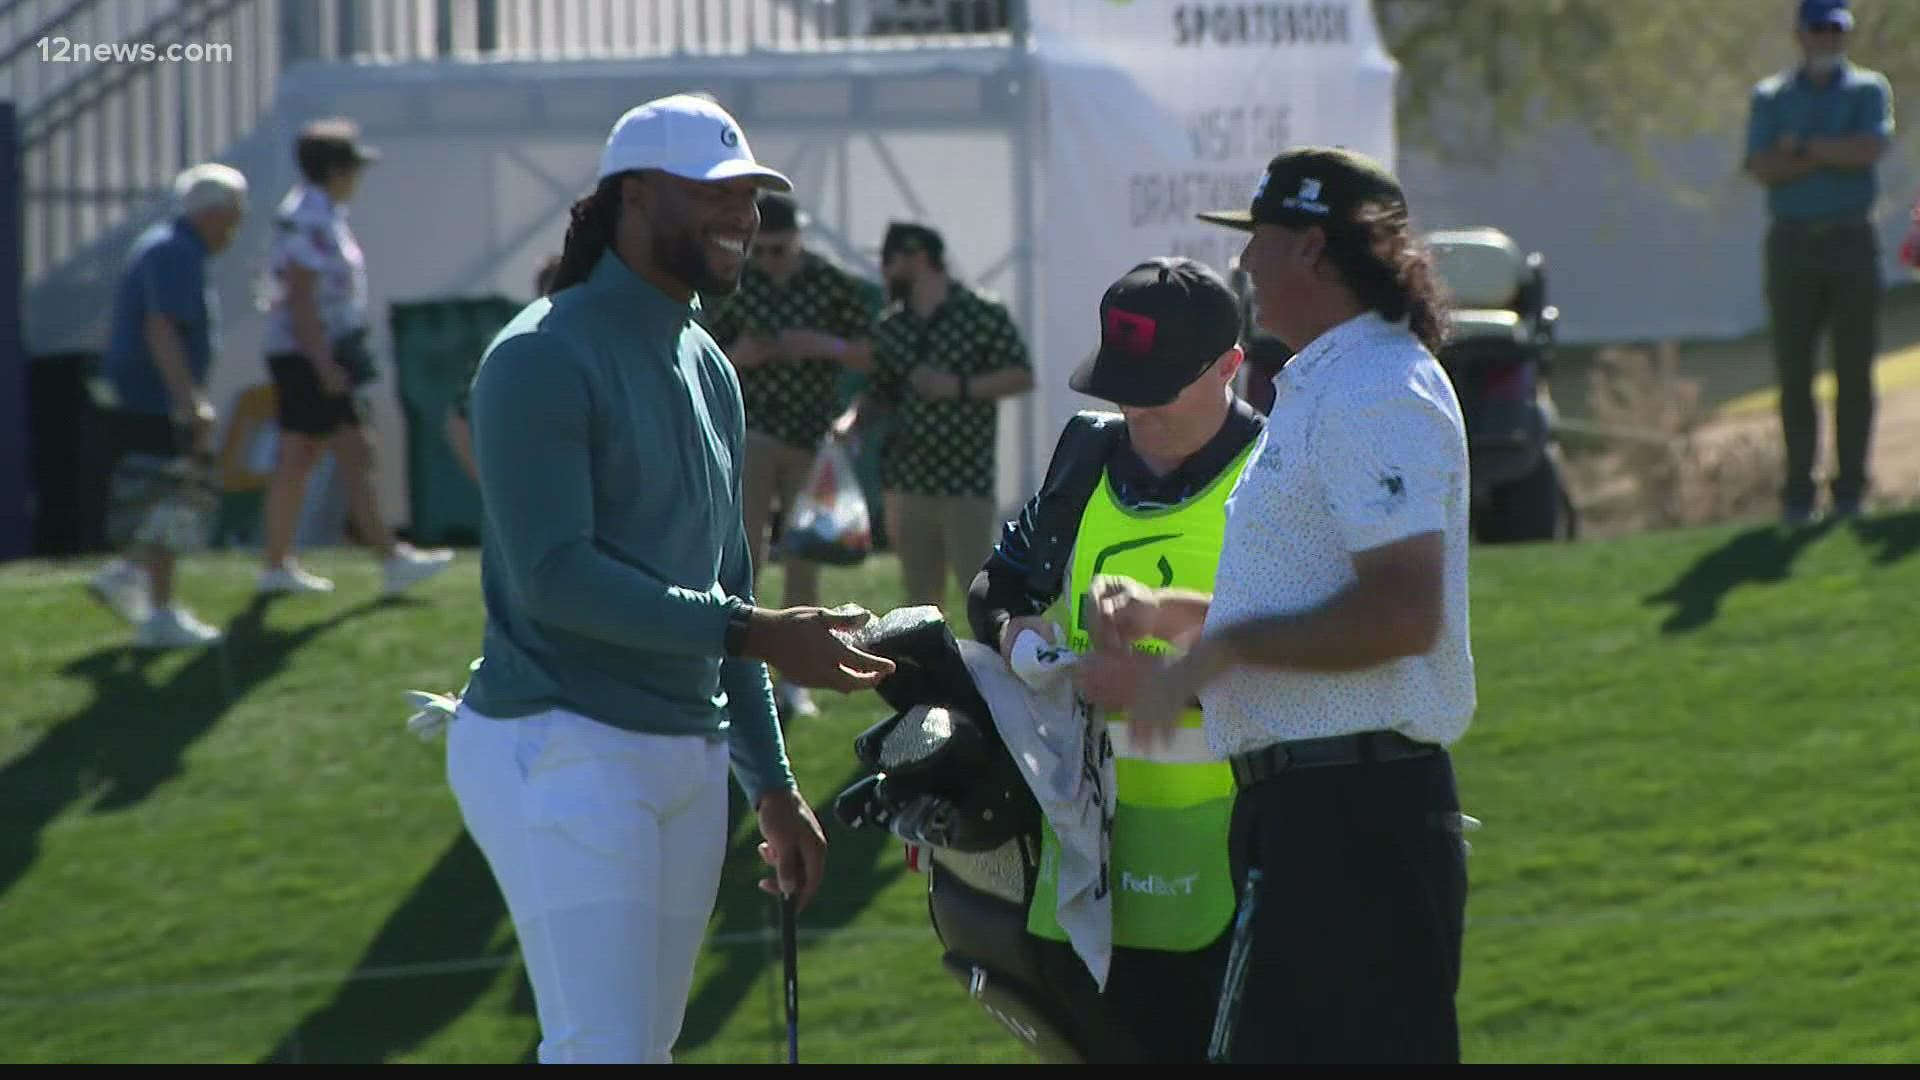 Wednesday at the WM Phoenix Open is all about the celebrities. Everyone from Larry Fitzgerald to Aaron Rodgers showed up to play some golf in Scottsdale!